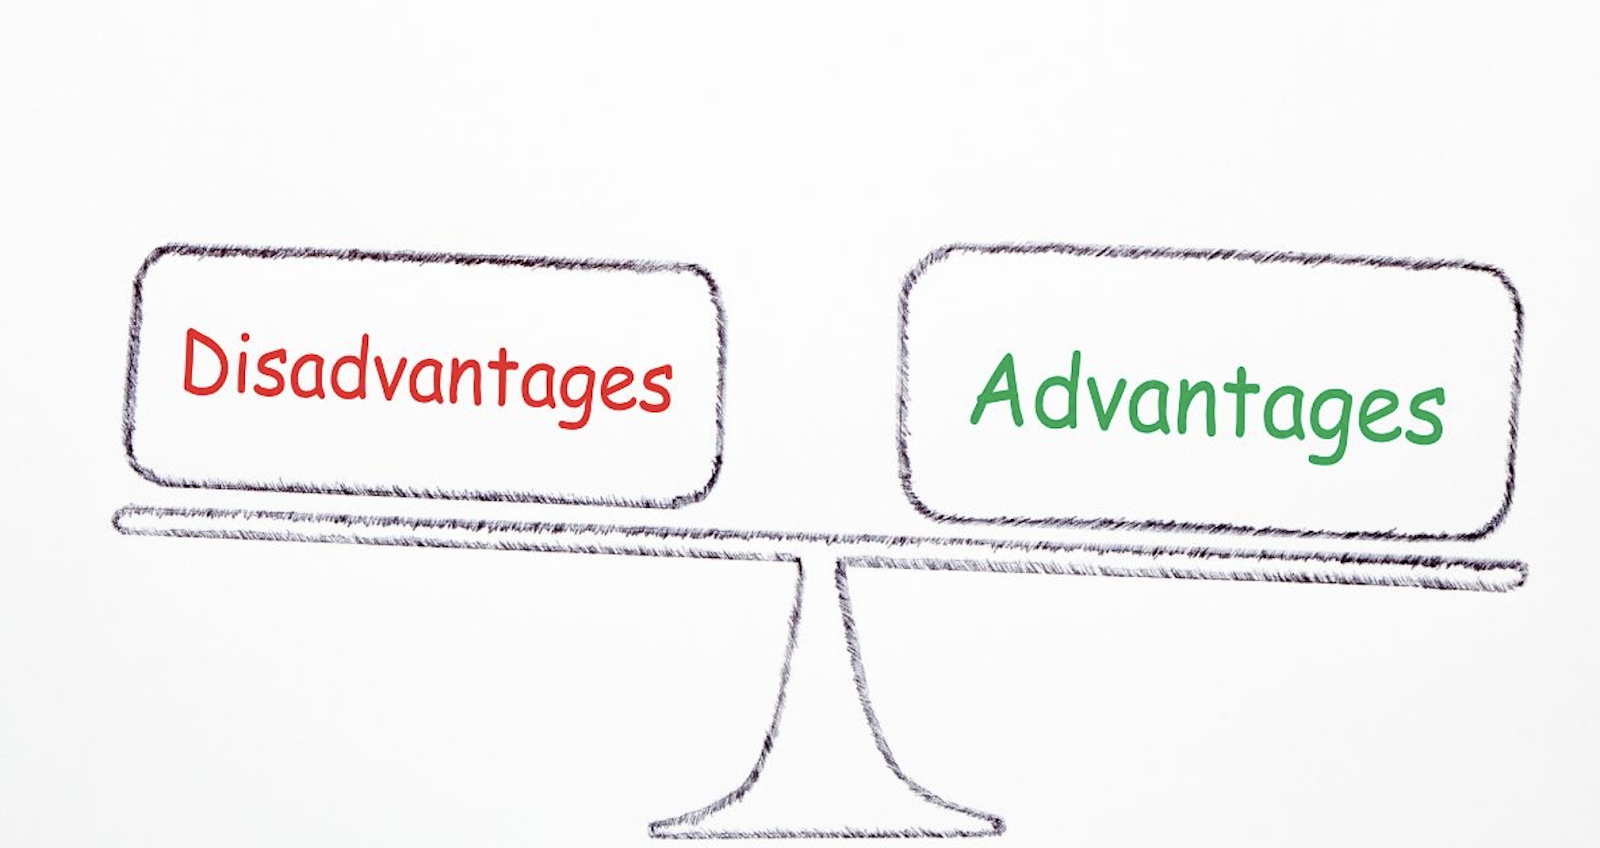 Visual representation of the words Advantages and Disadvantages.